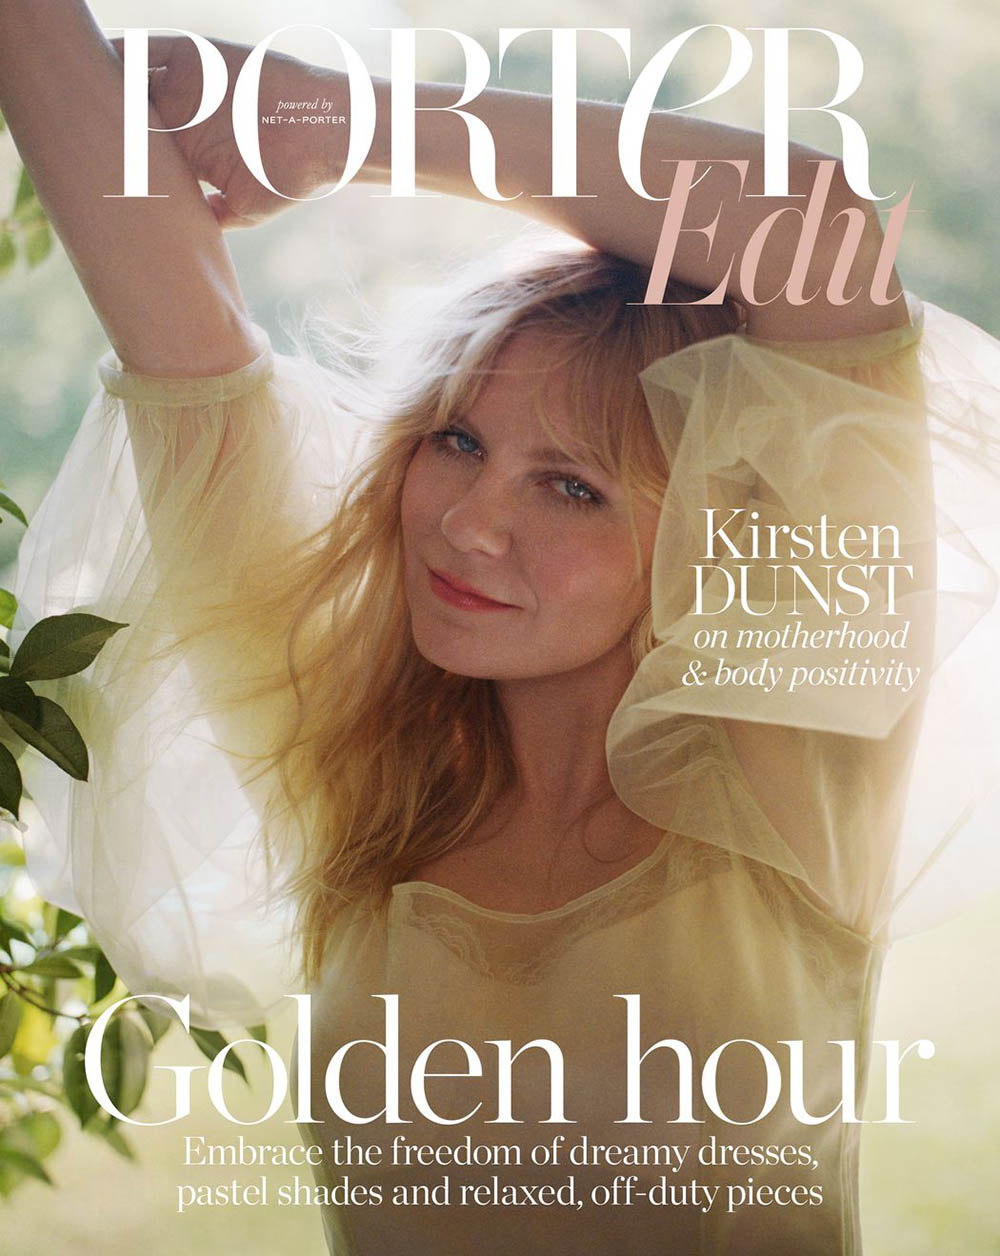 Kirsten Dunst covers Porter Edit August 23rd, 2019 by Annelise Phillips